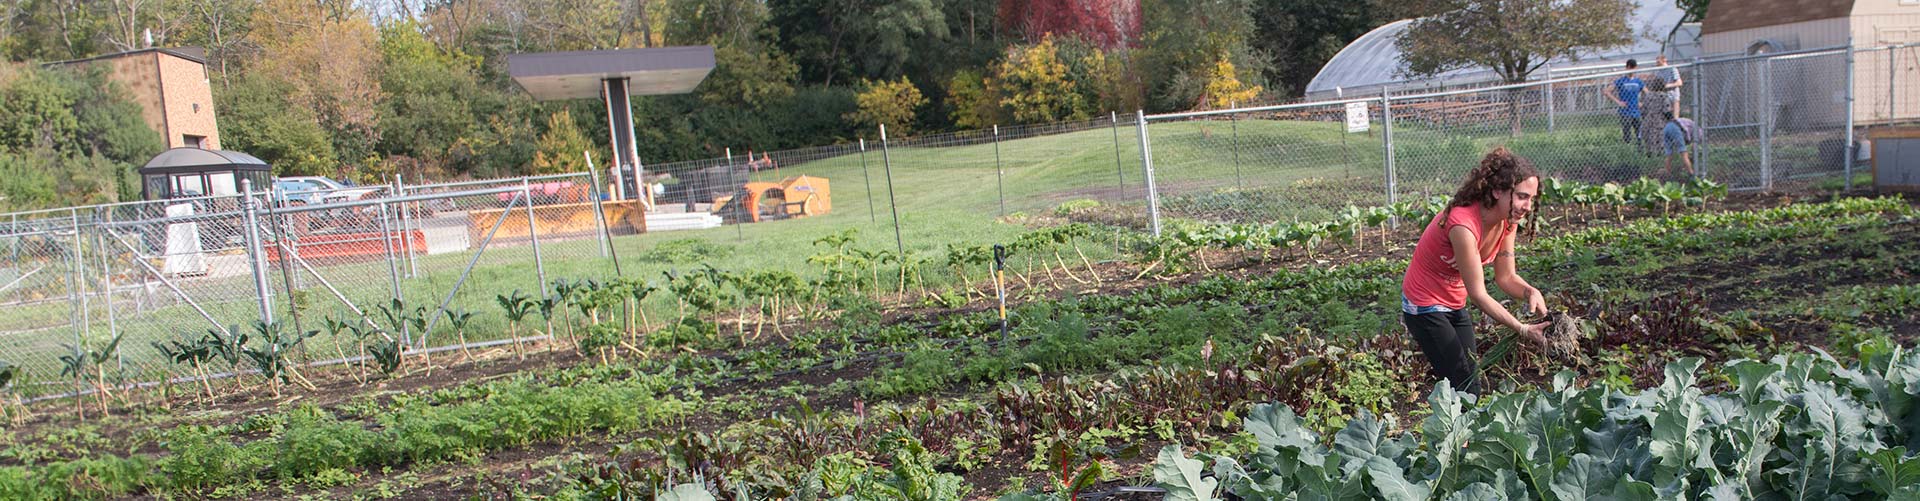 A student tending a garden on the Grayslake Campus